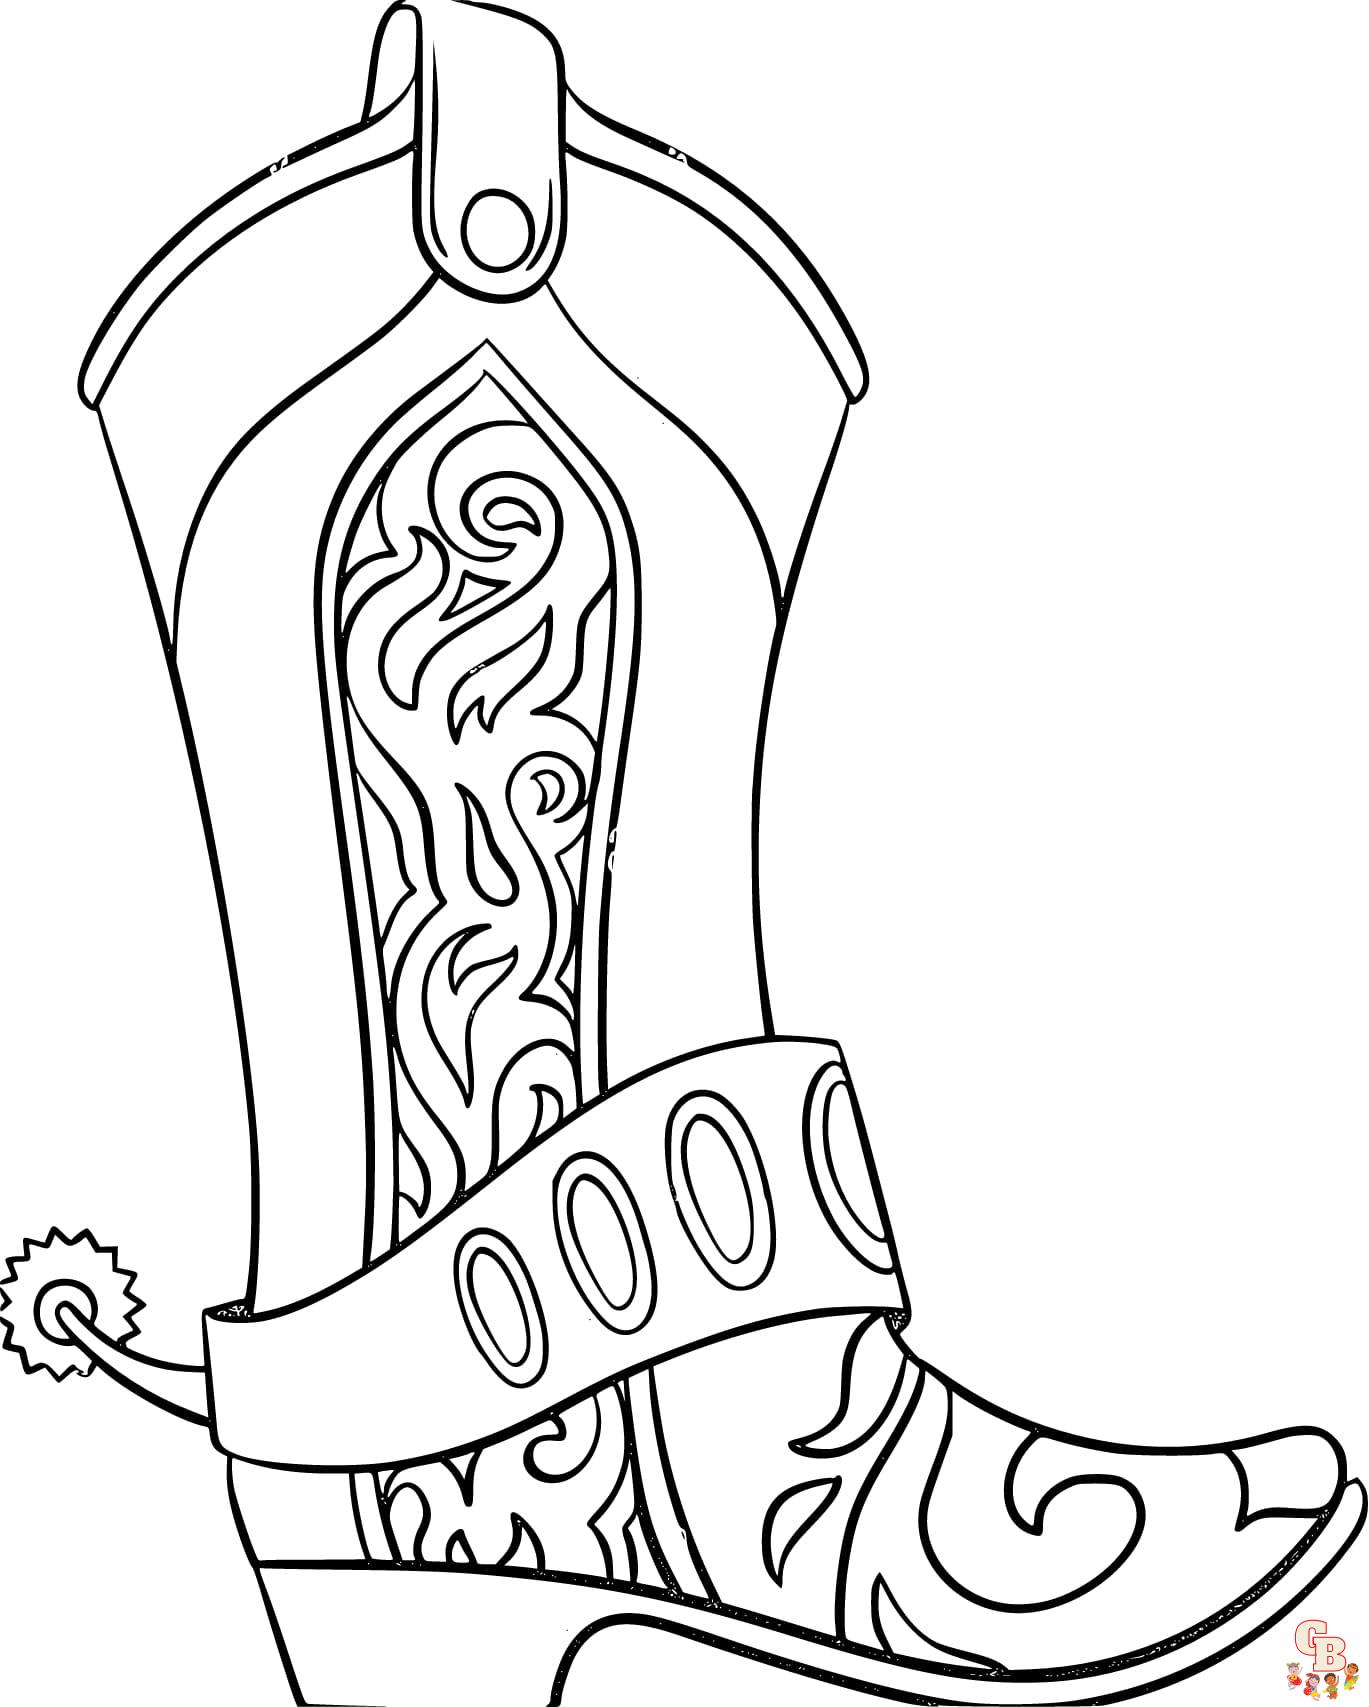 cowboy boots coloring page